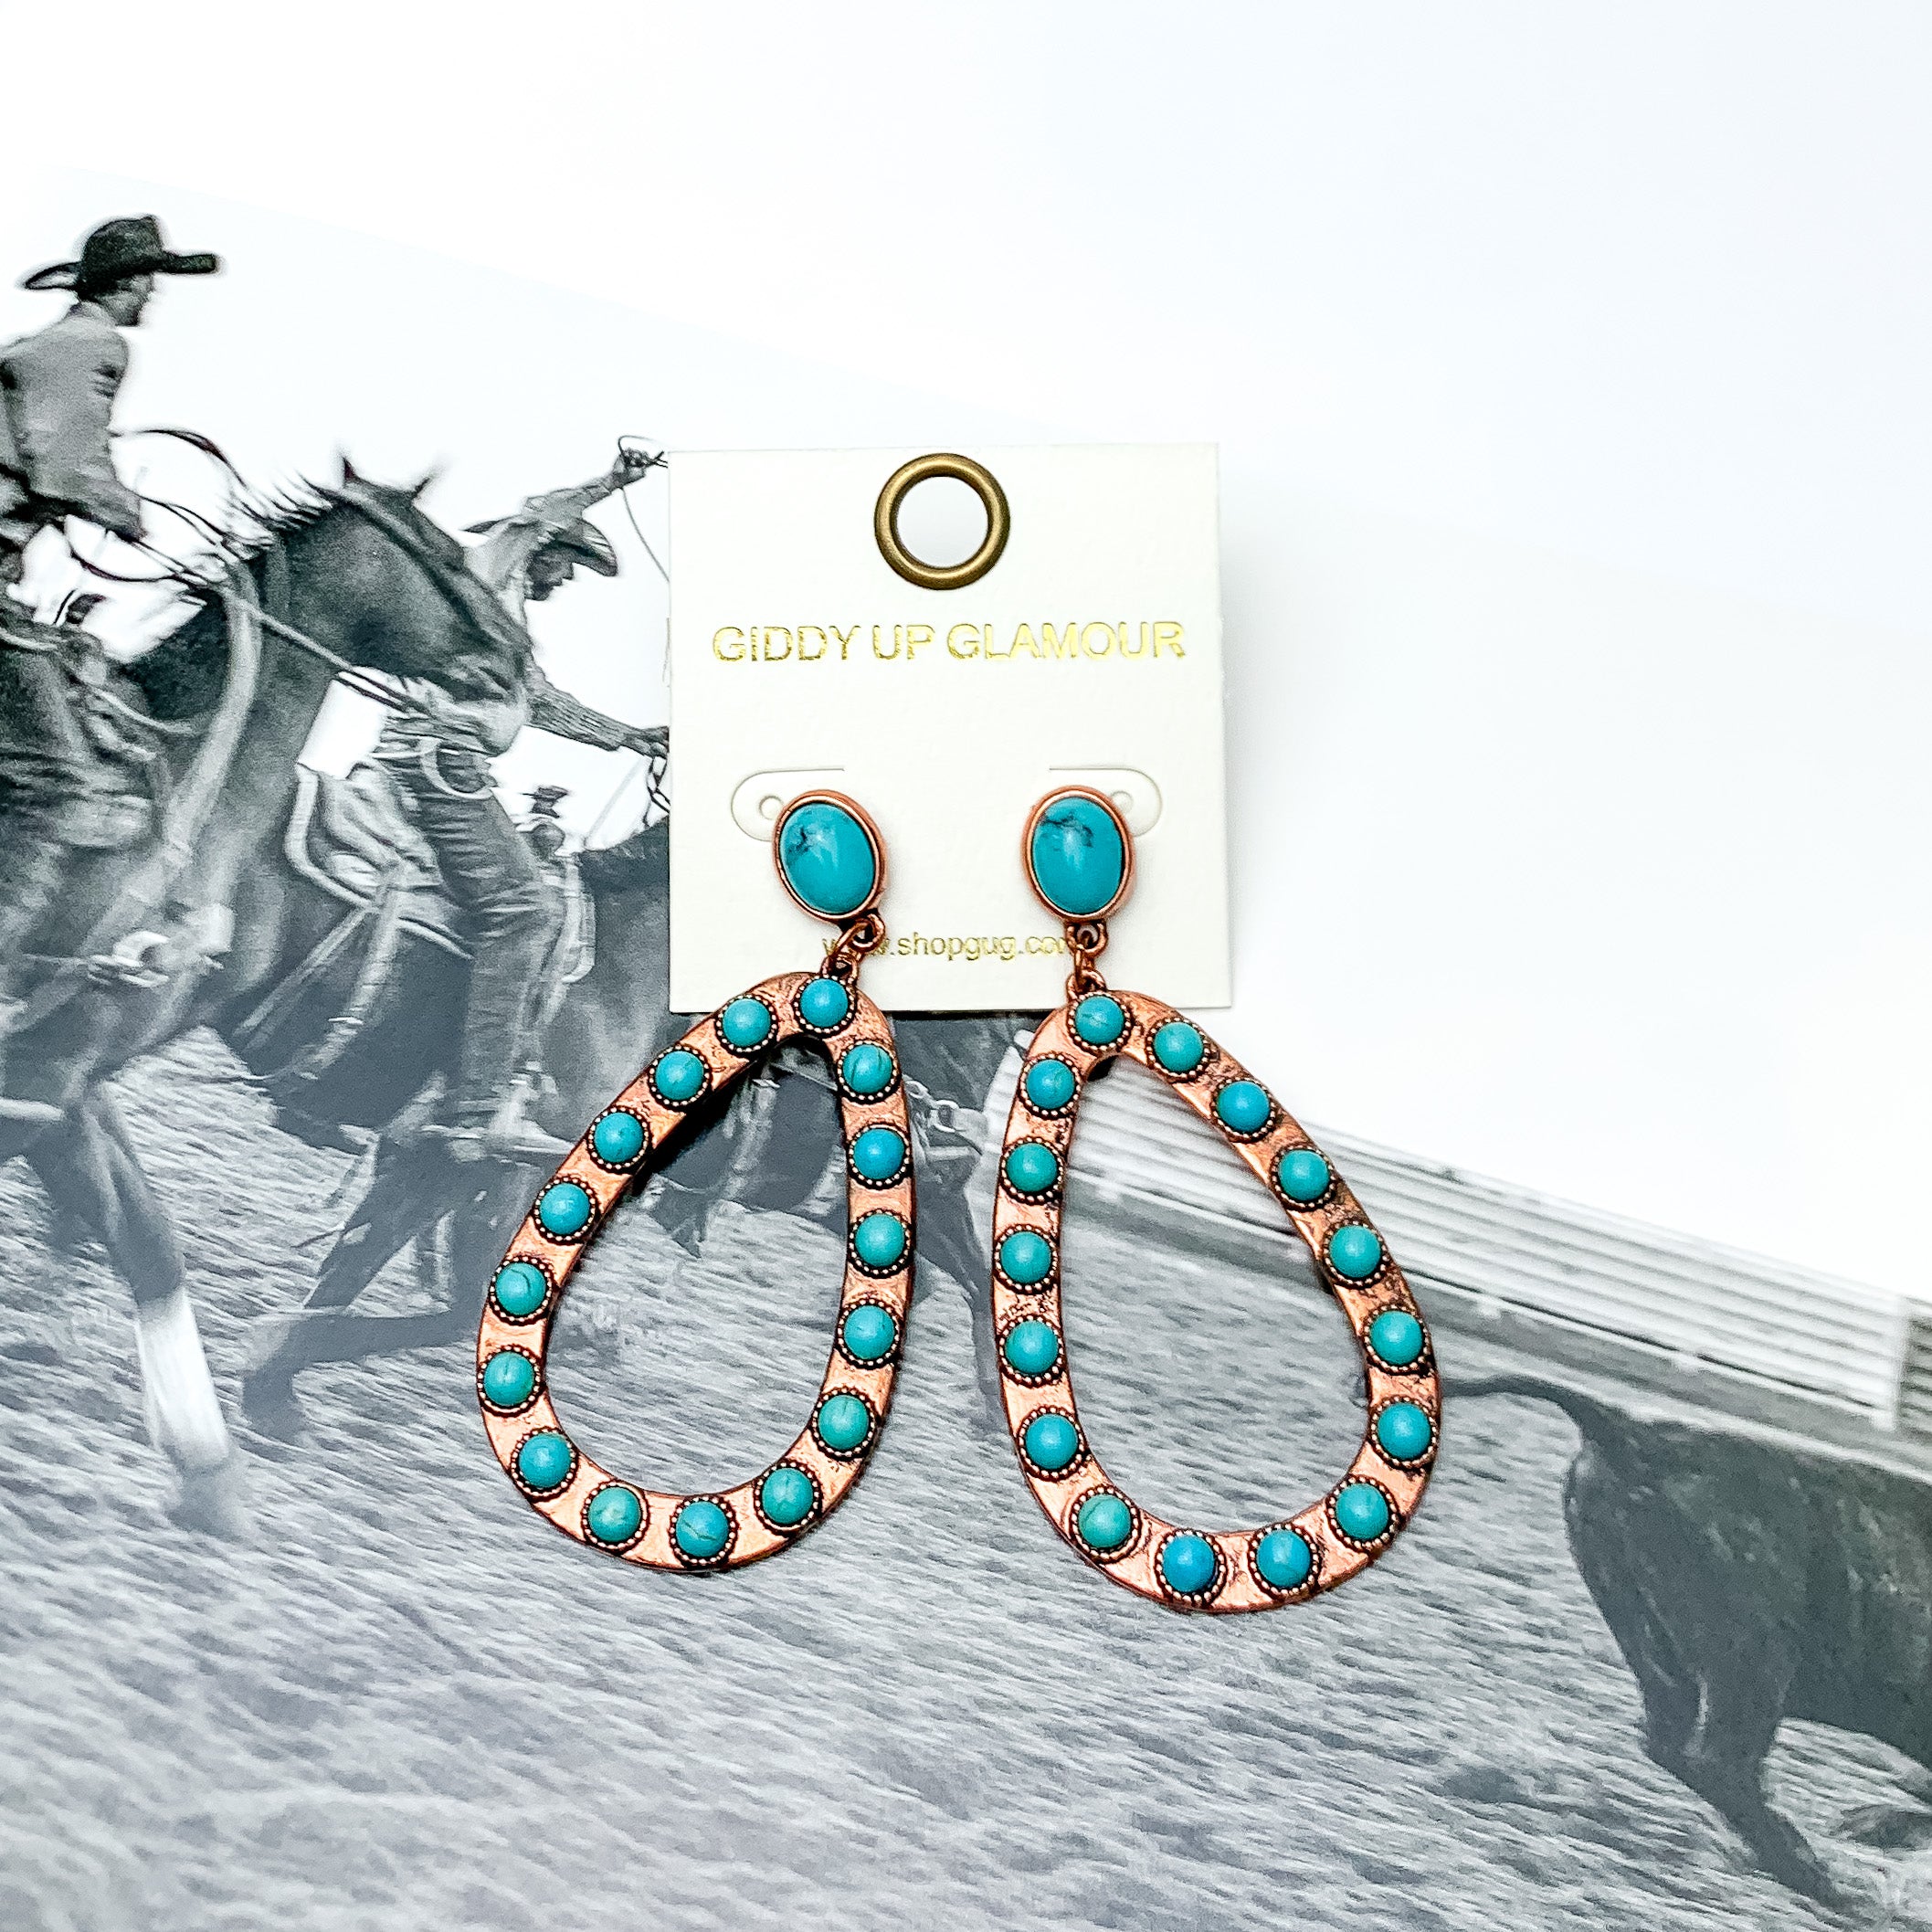 Western Copper Tone Open Teardrop Earrings With Stones in Turquoise. Pictured on a western background picture.